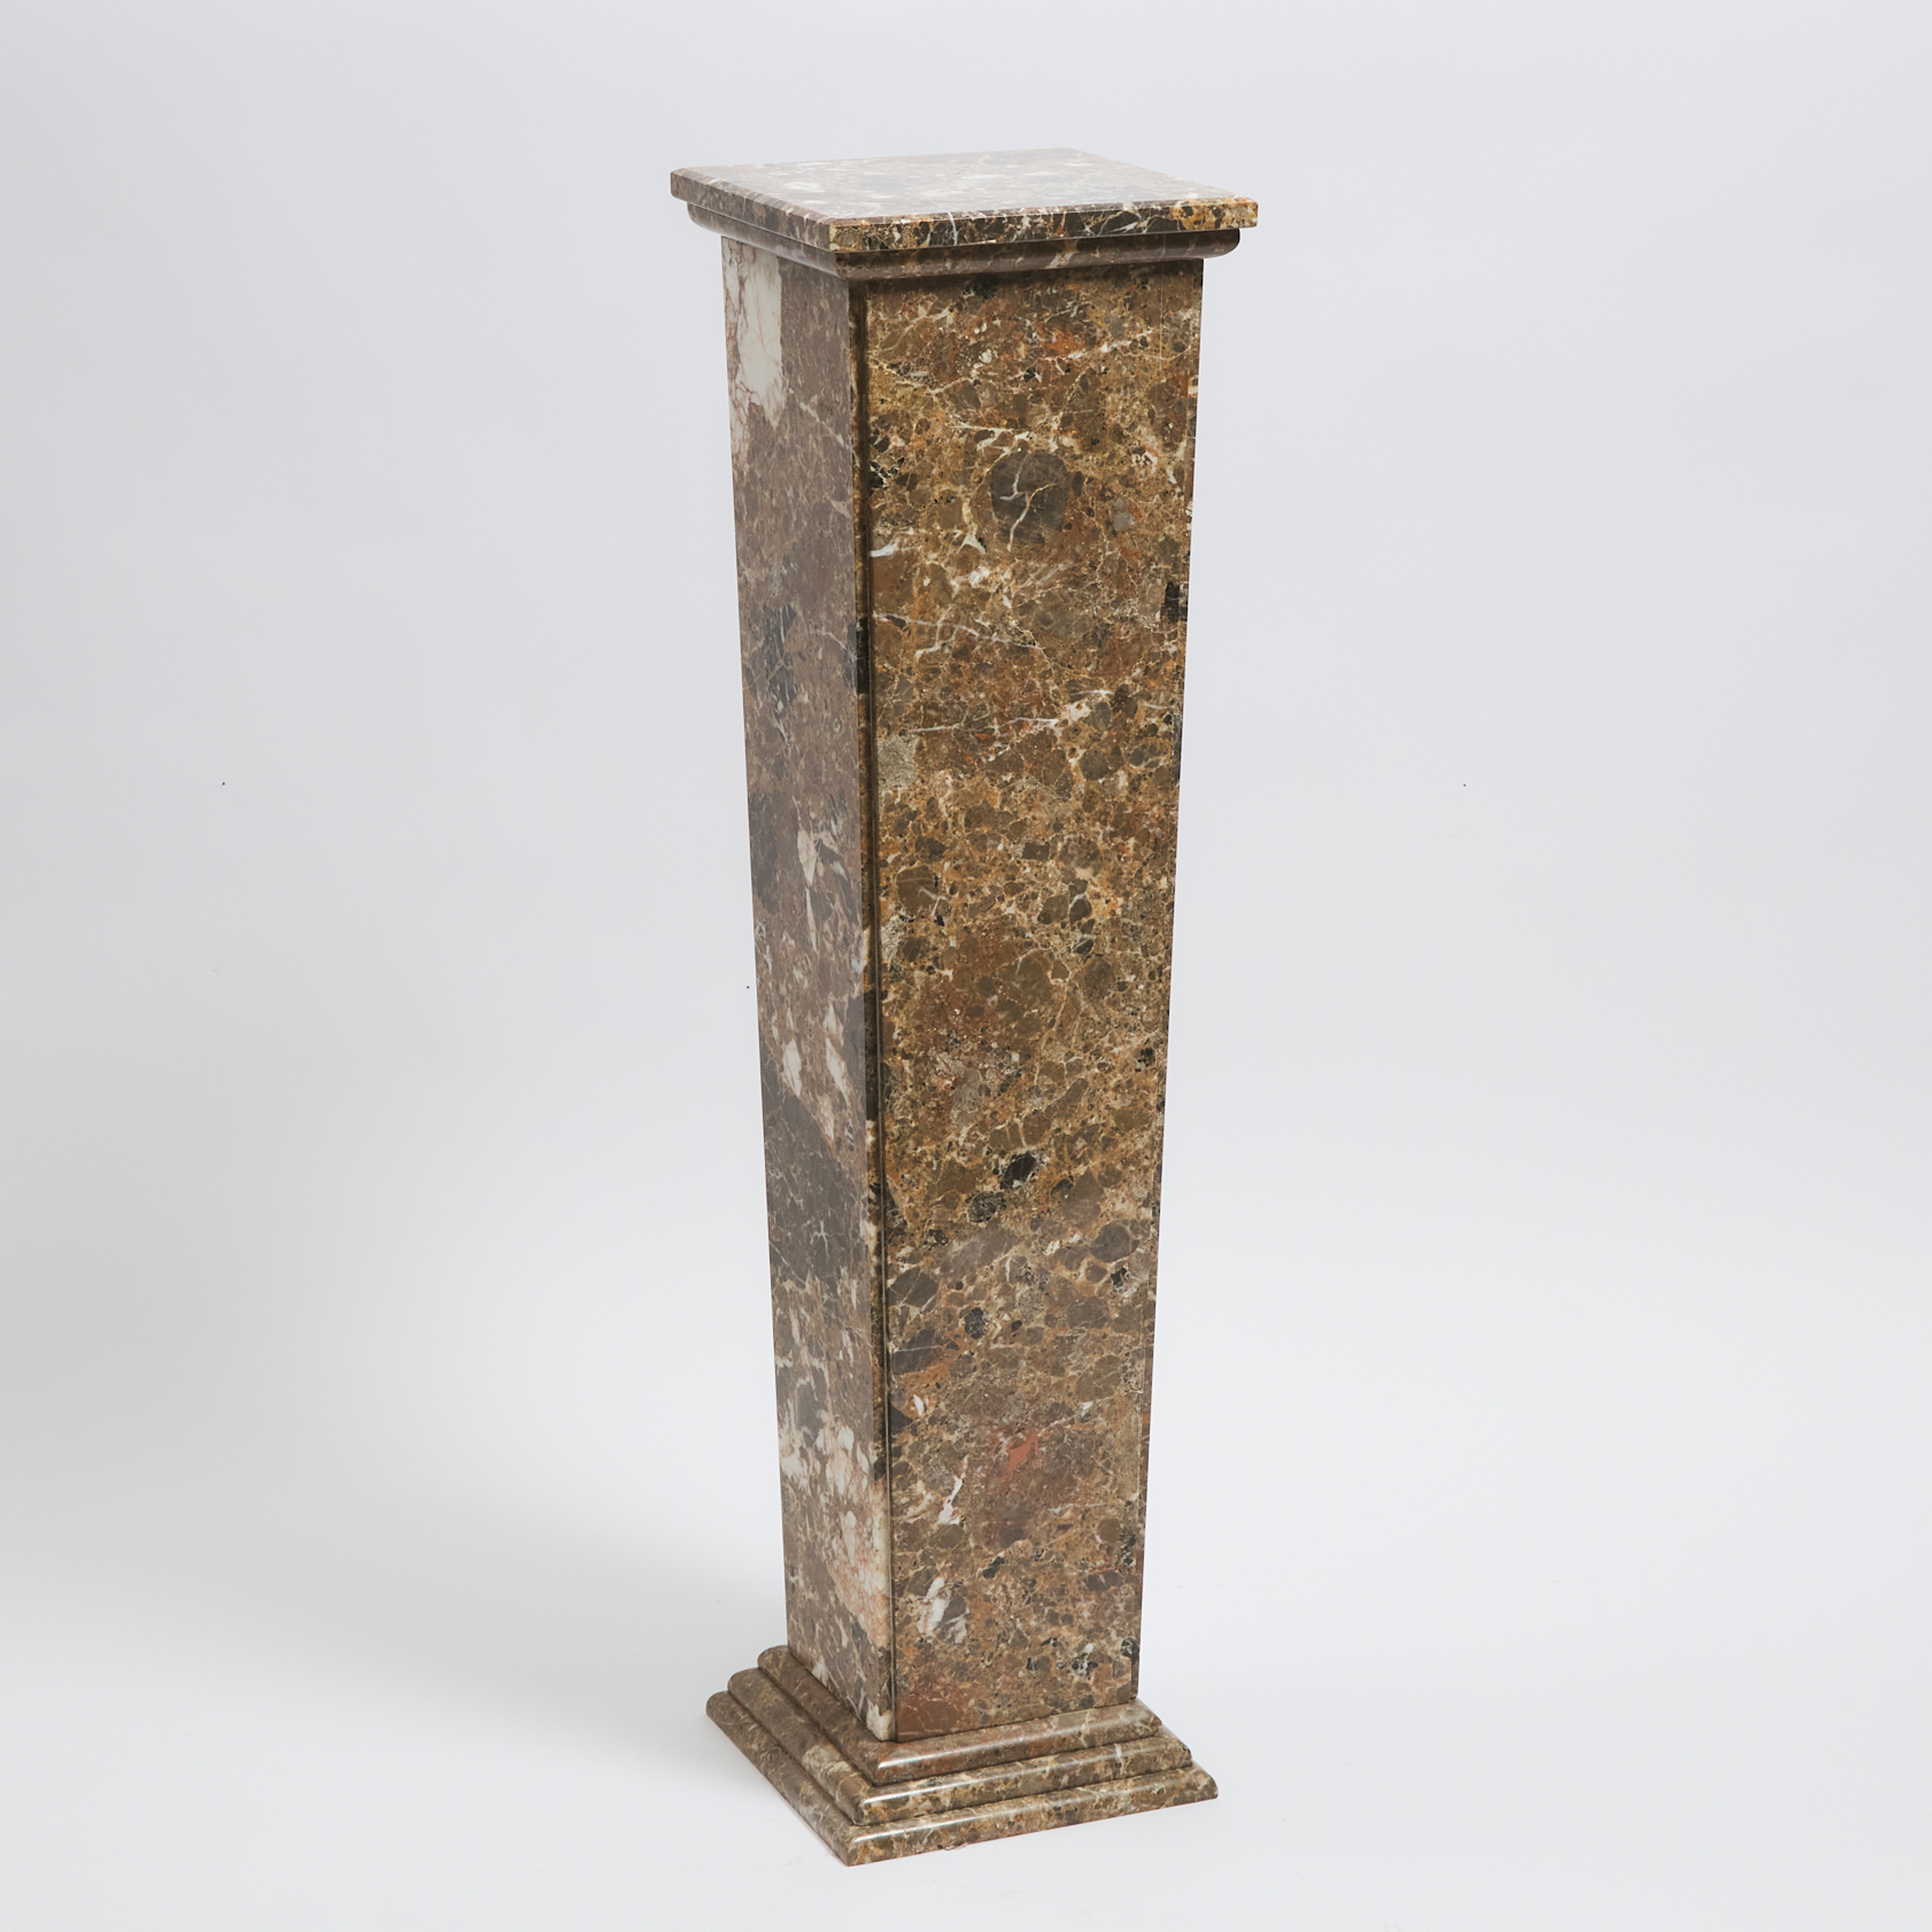 Contemporary Aggregate Stone Tapered Column Form Pedestal, 20th century